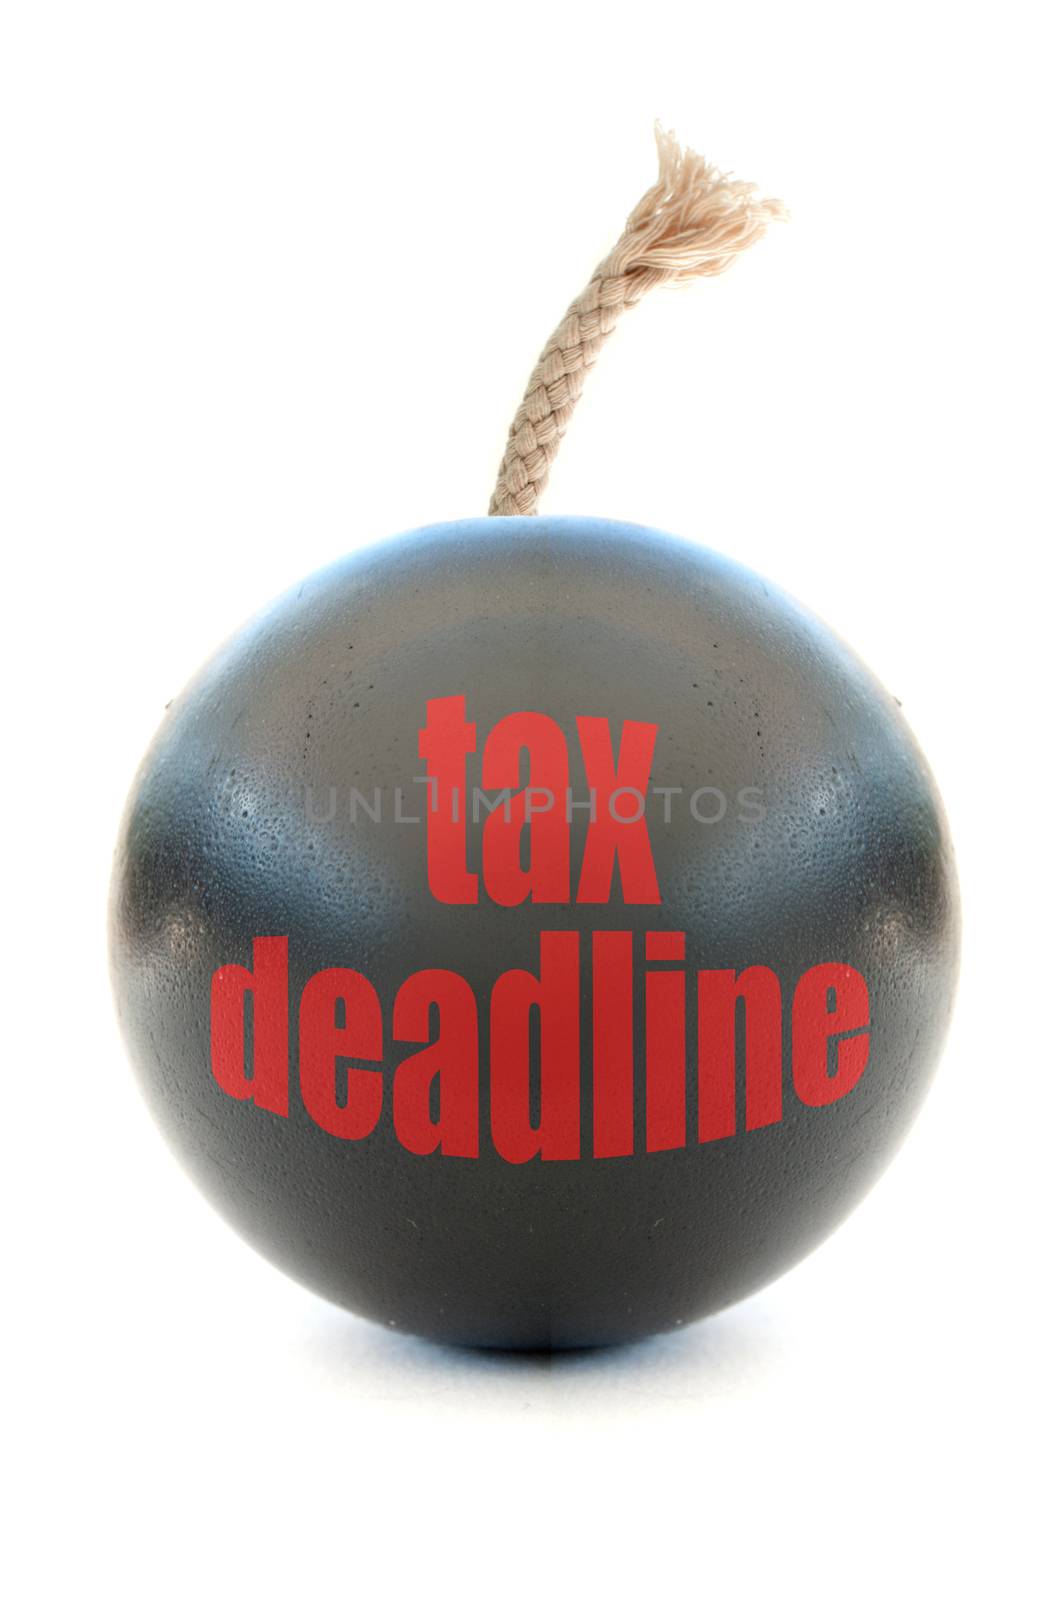 Bomb labeled with tax deadline over a white background